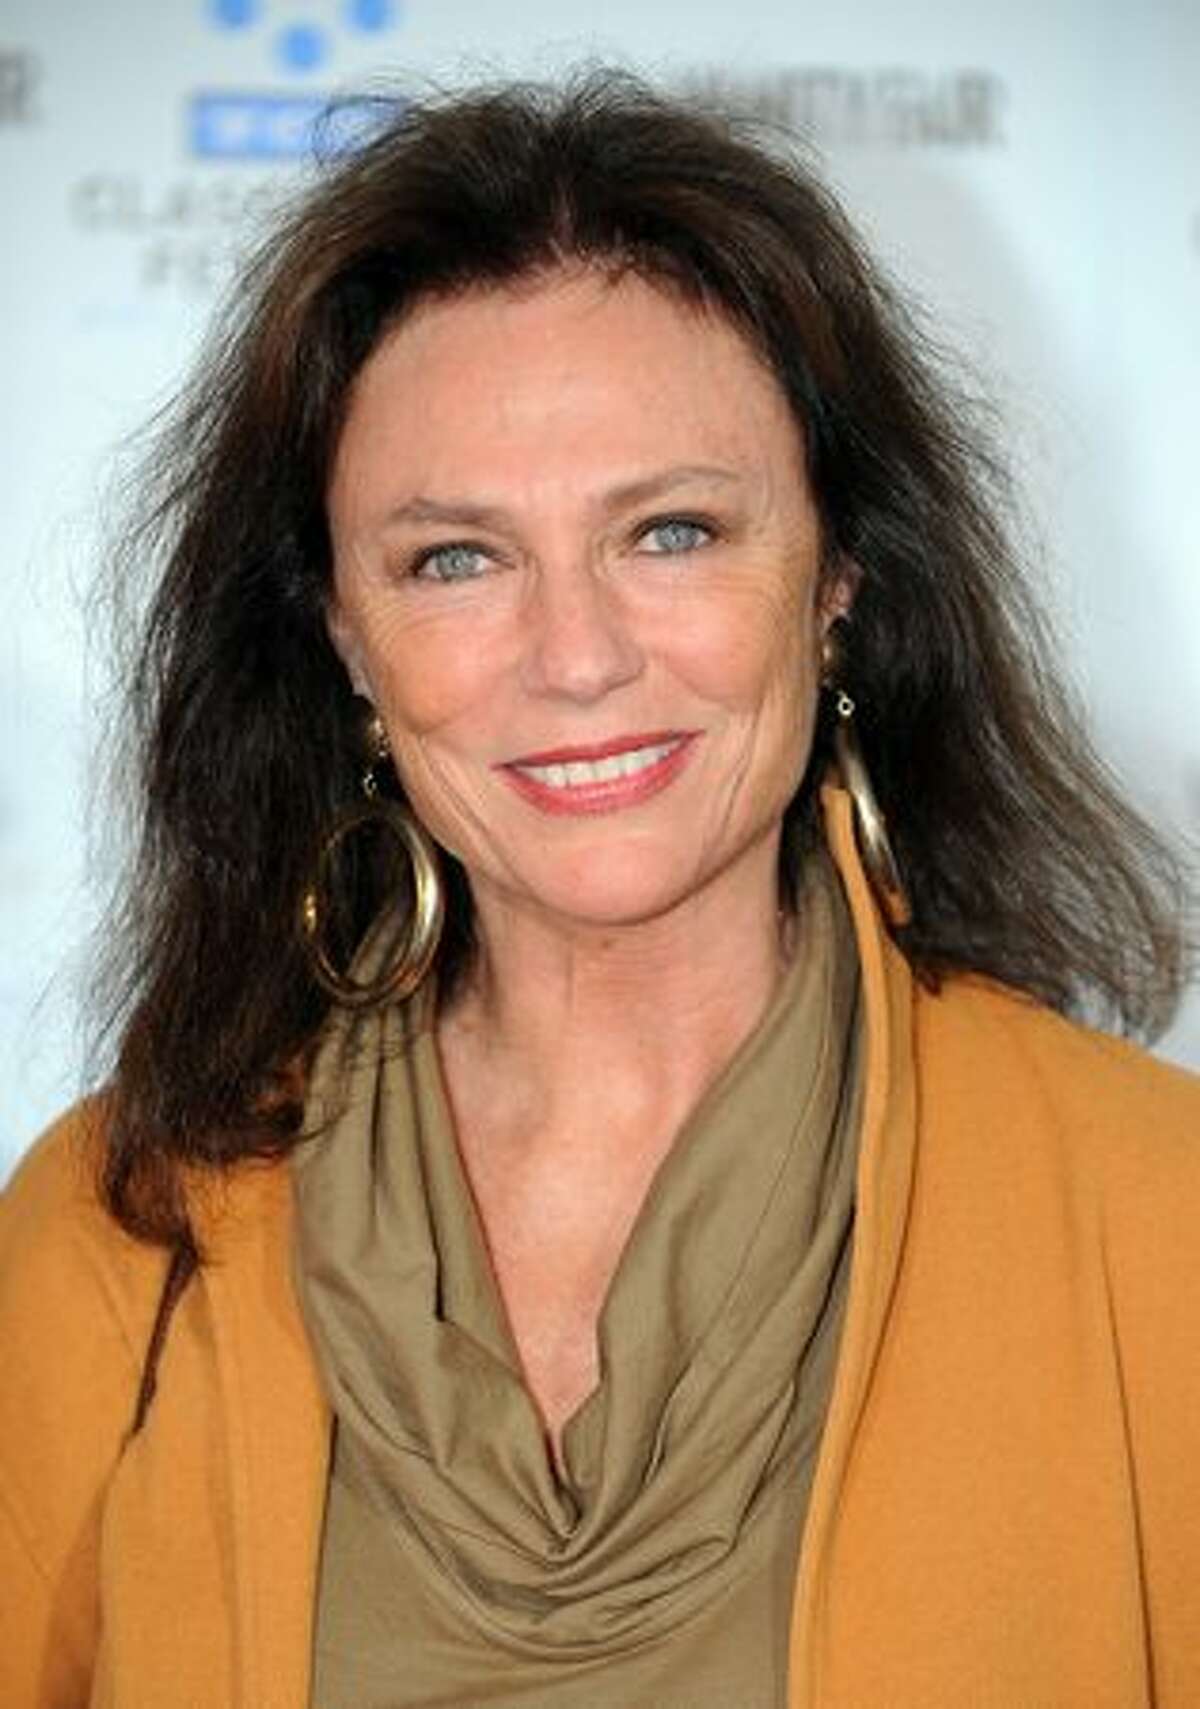 Actress Jacqueline Bisset arrives at the world premiere of the restored "A Star is Born" during the opening Night Gala of the 2010 TCM Classic Film Festival in Hollywood, California, on April 22, 2010.